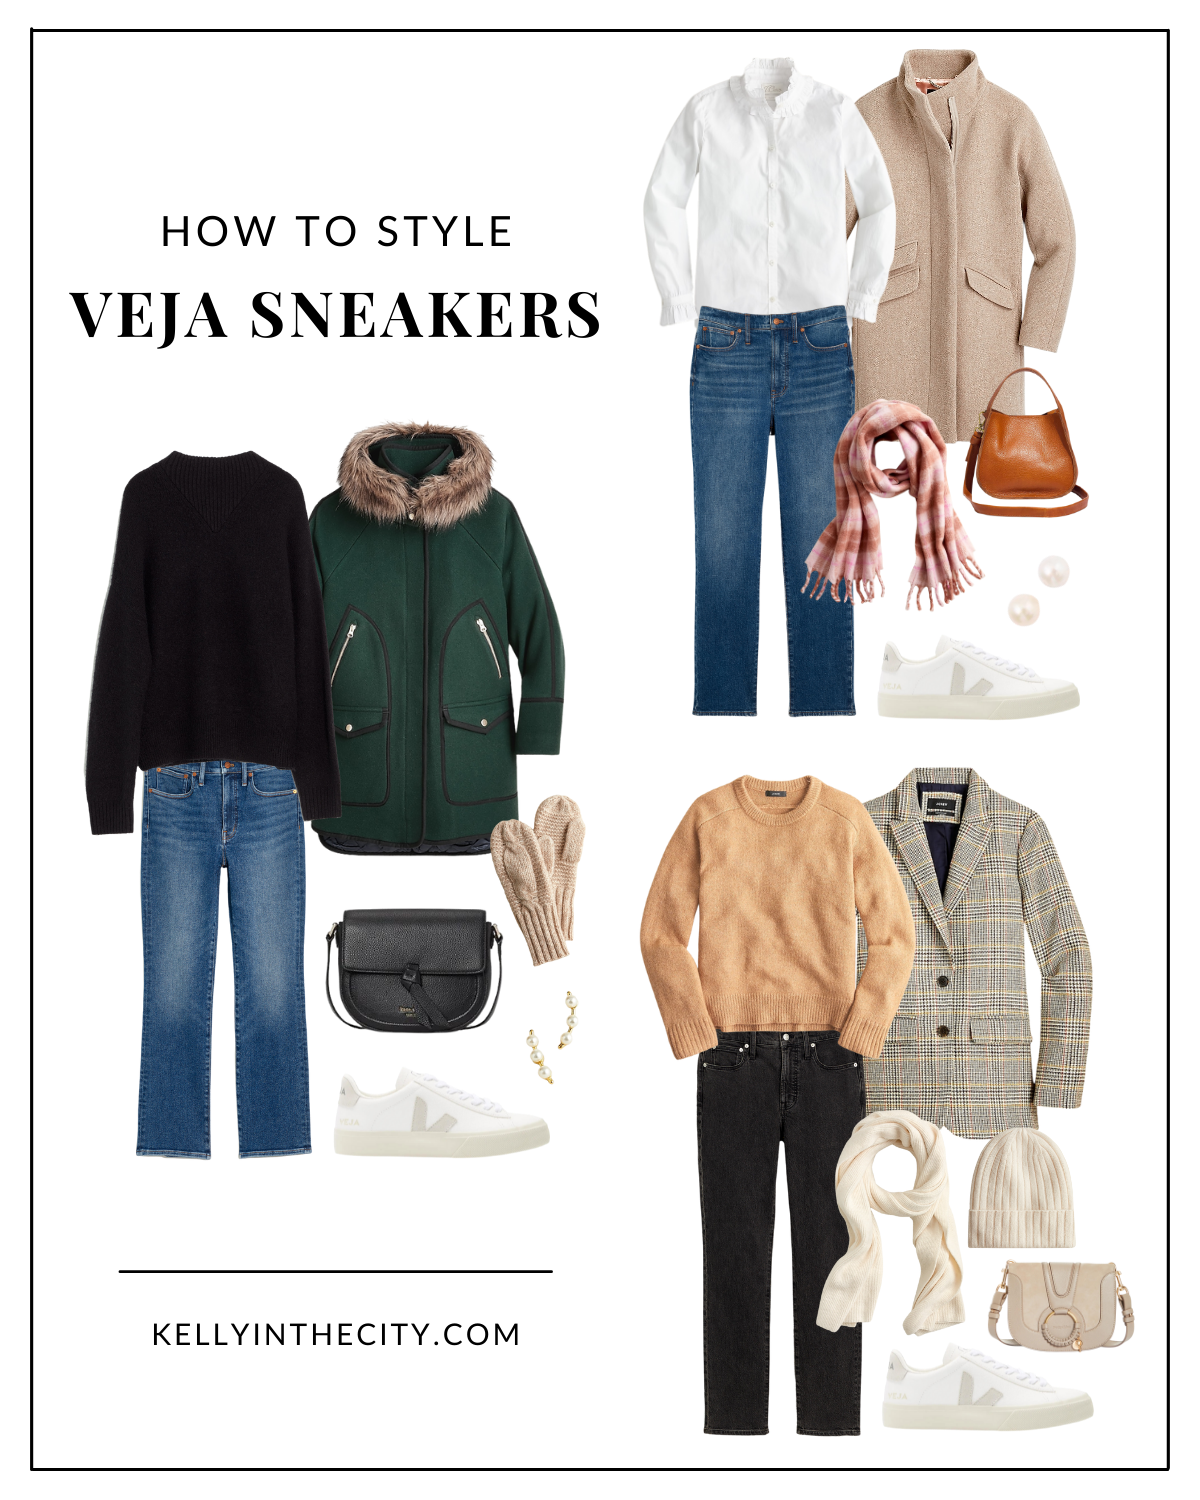 How to style Veja sneakers